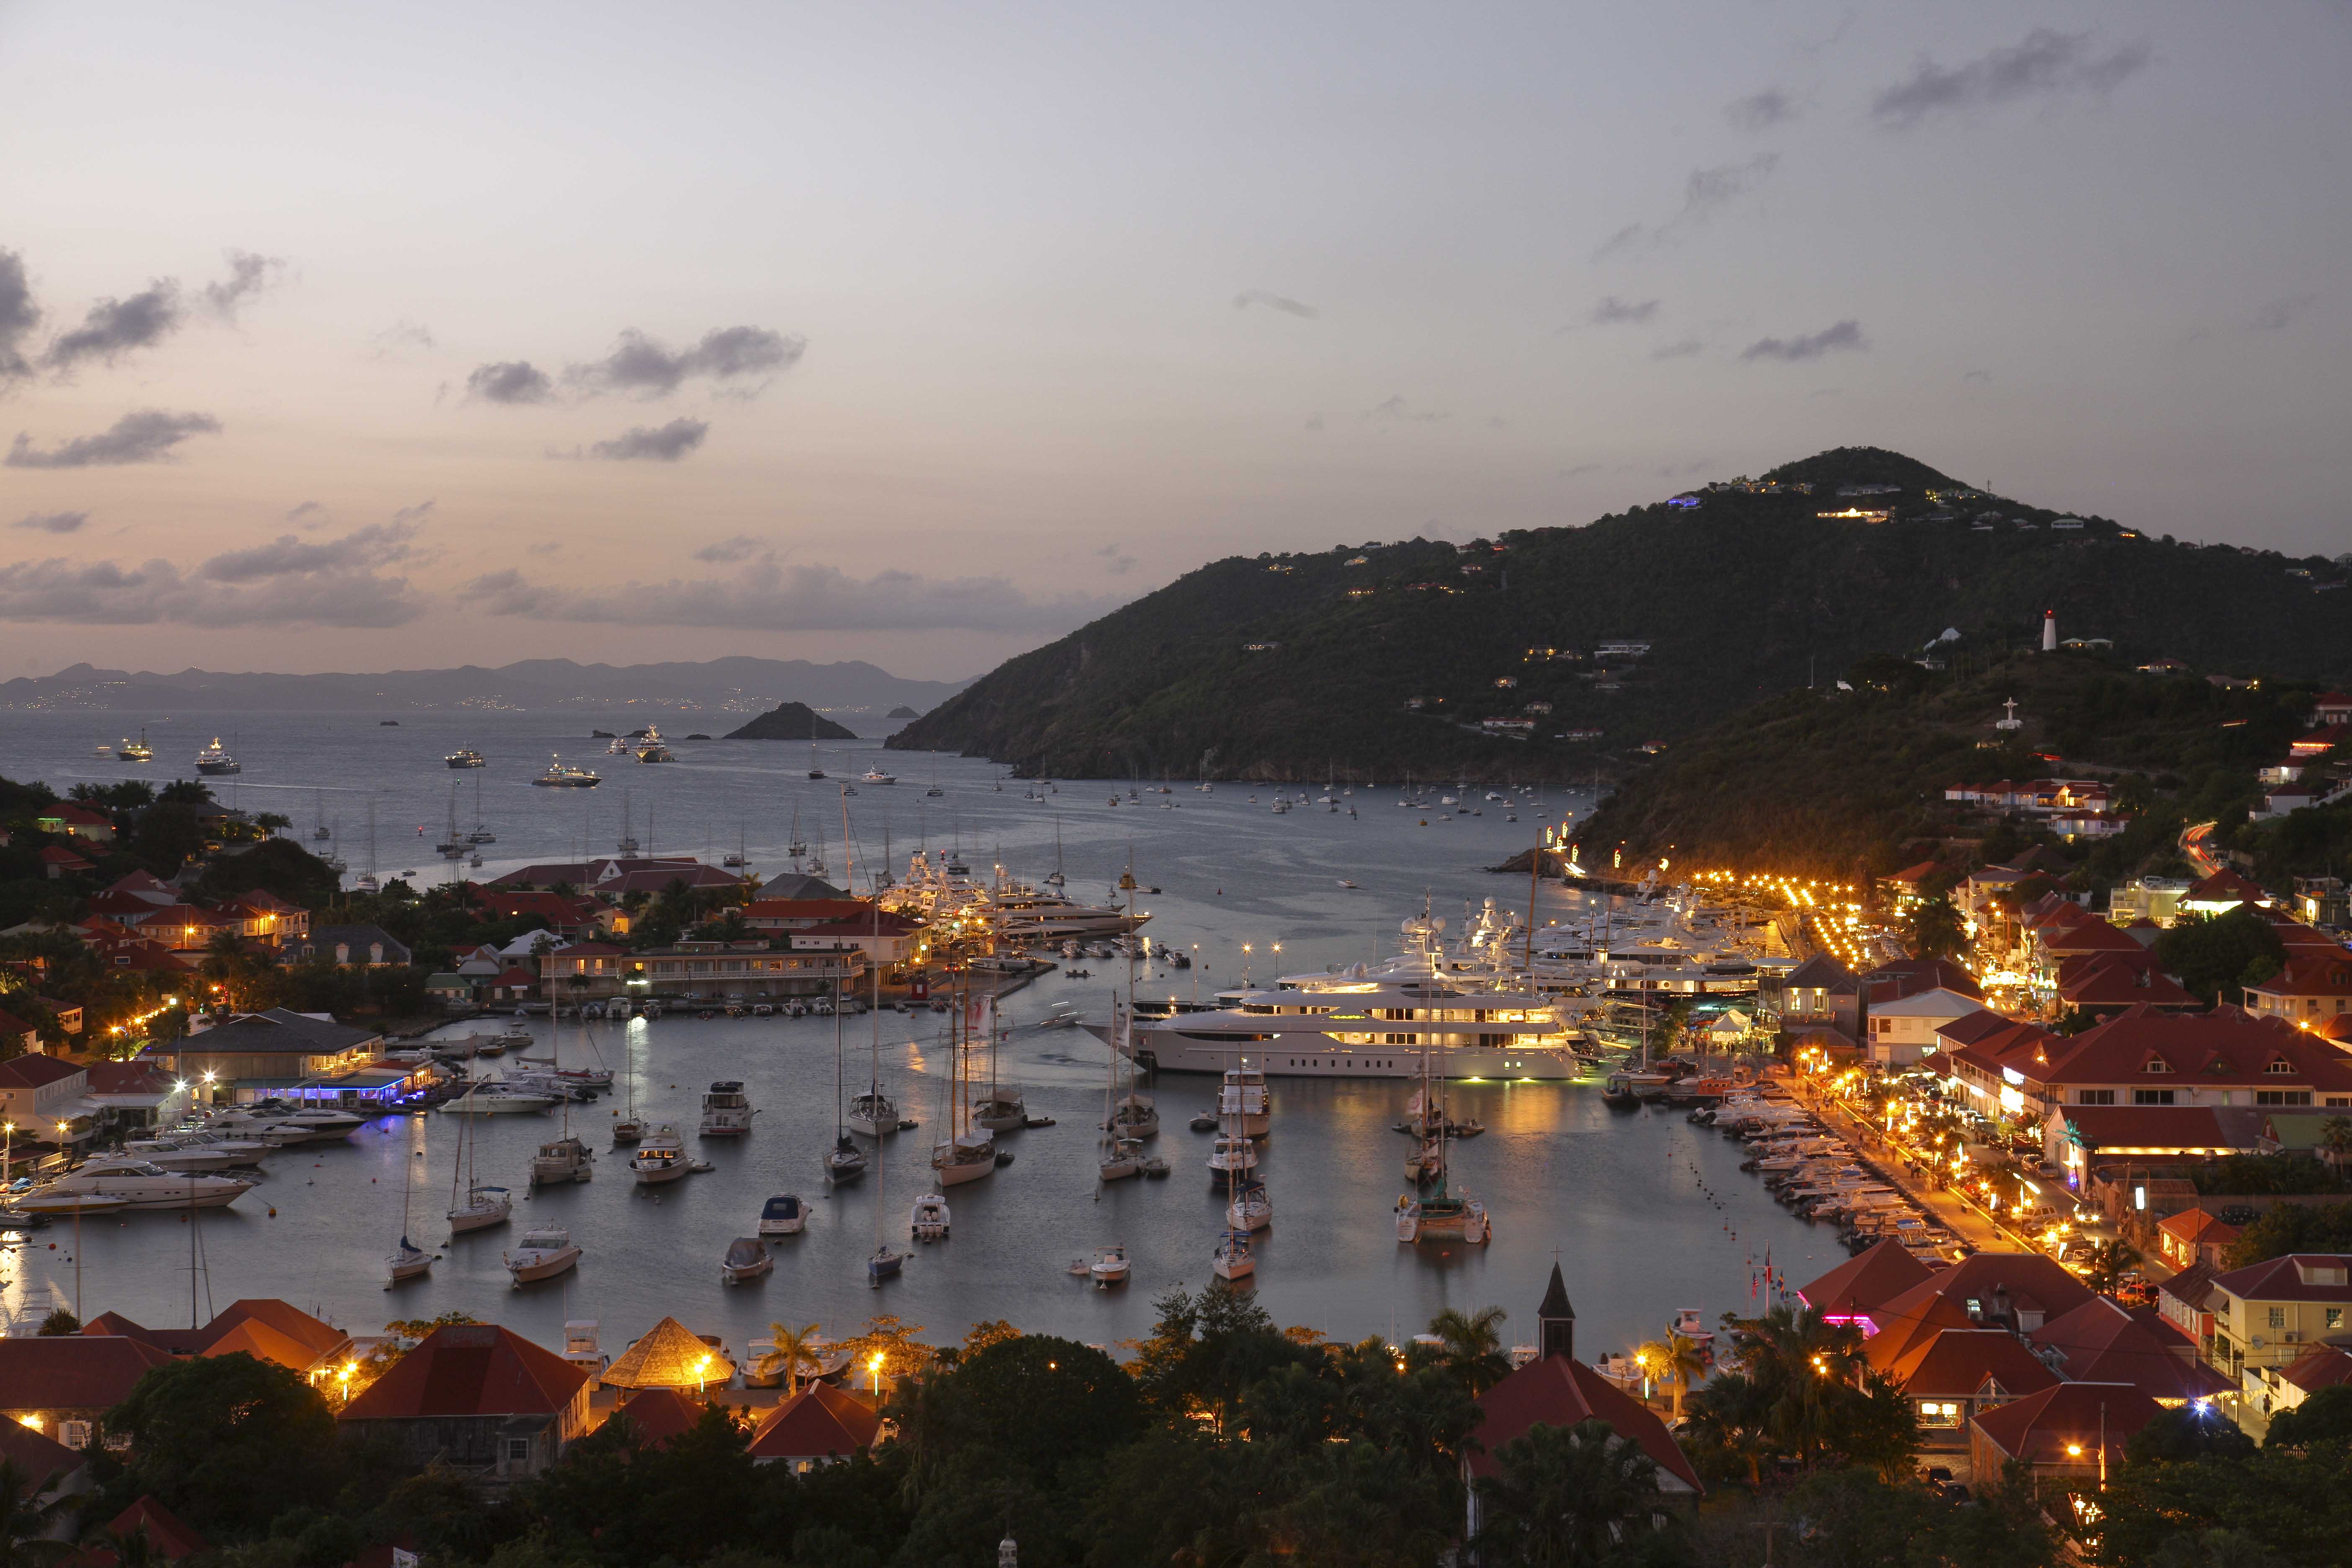 New Year's week on St Barth – Peg's Blog